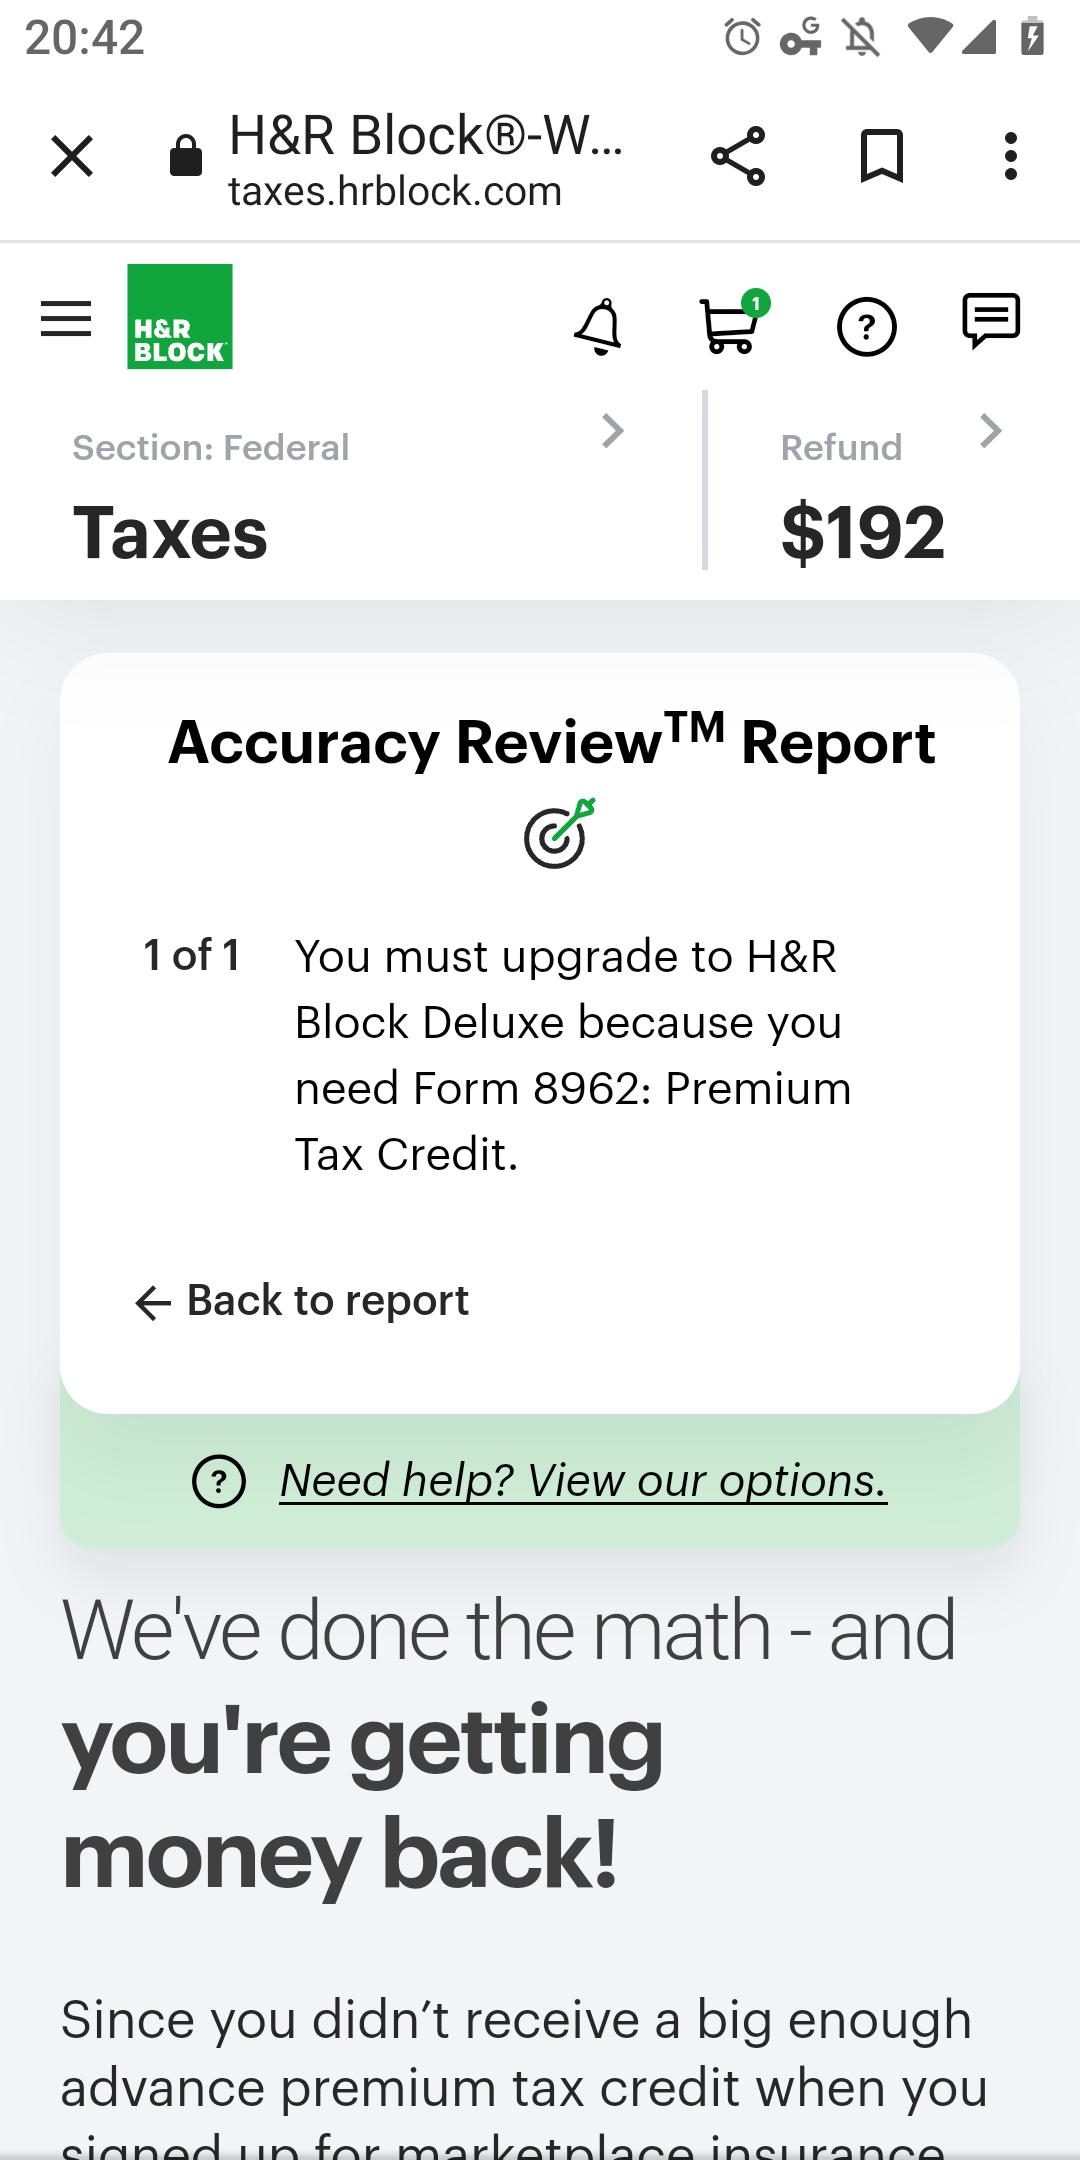 Screenshot of H&R Block website showing request to upgrade in order to file taxes.